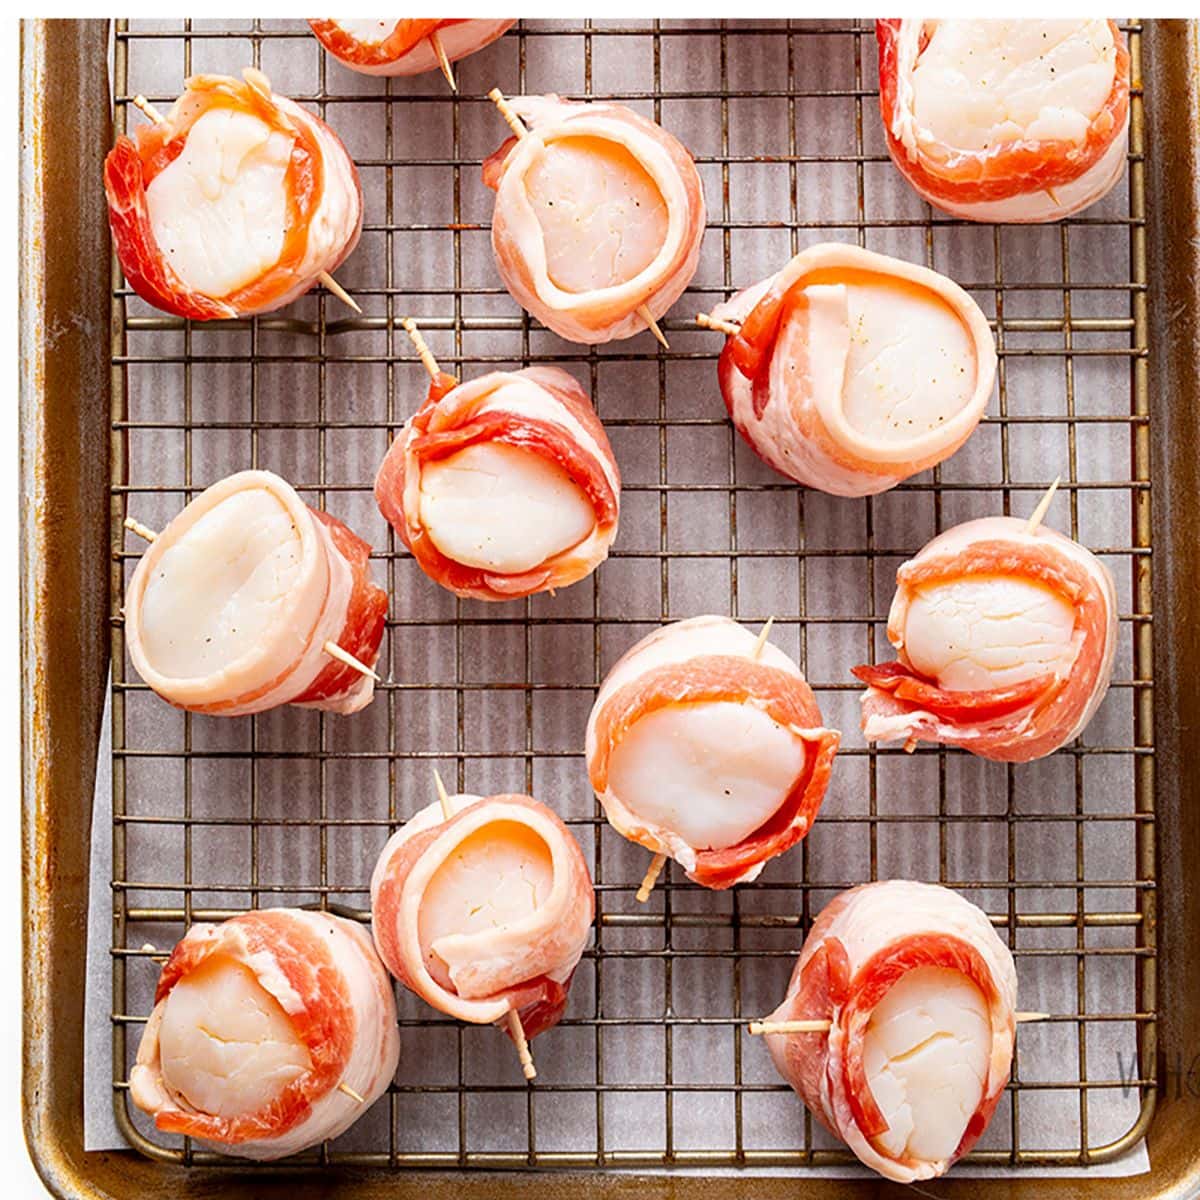 Scallops wrapped in bacon secured with toothpicks and placed on a rack over a sheet pan.